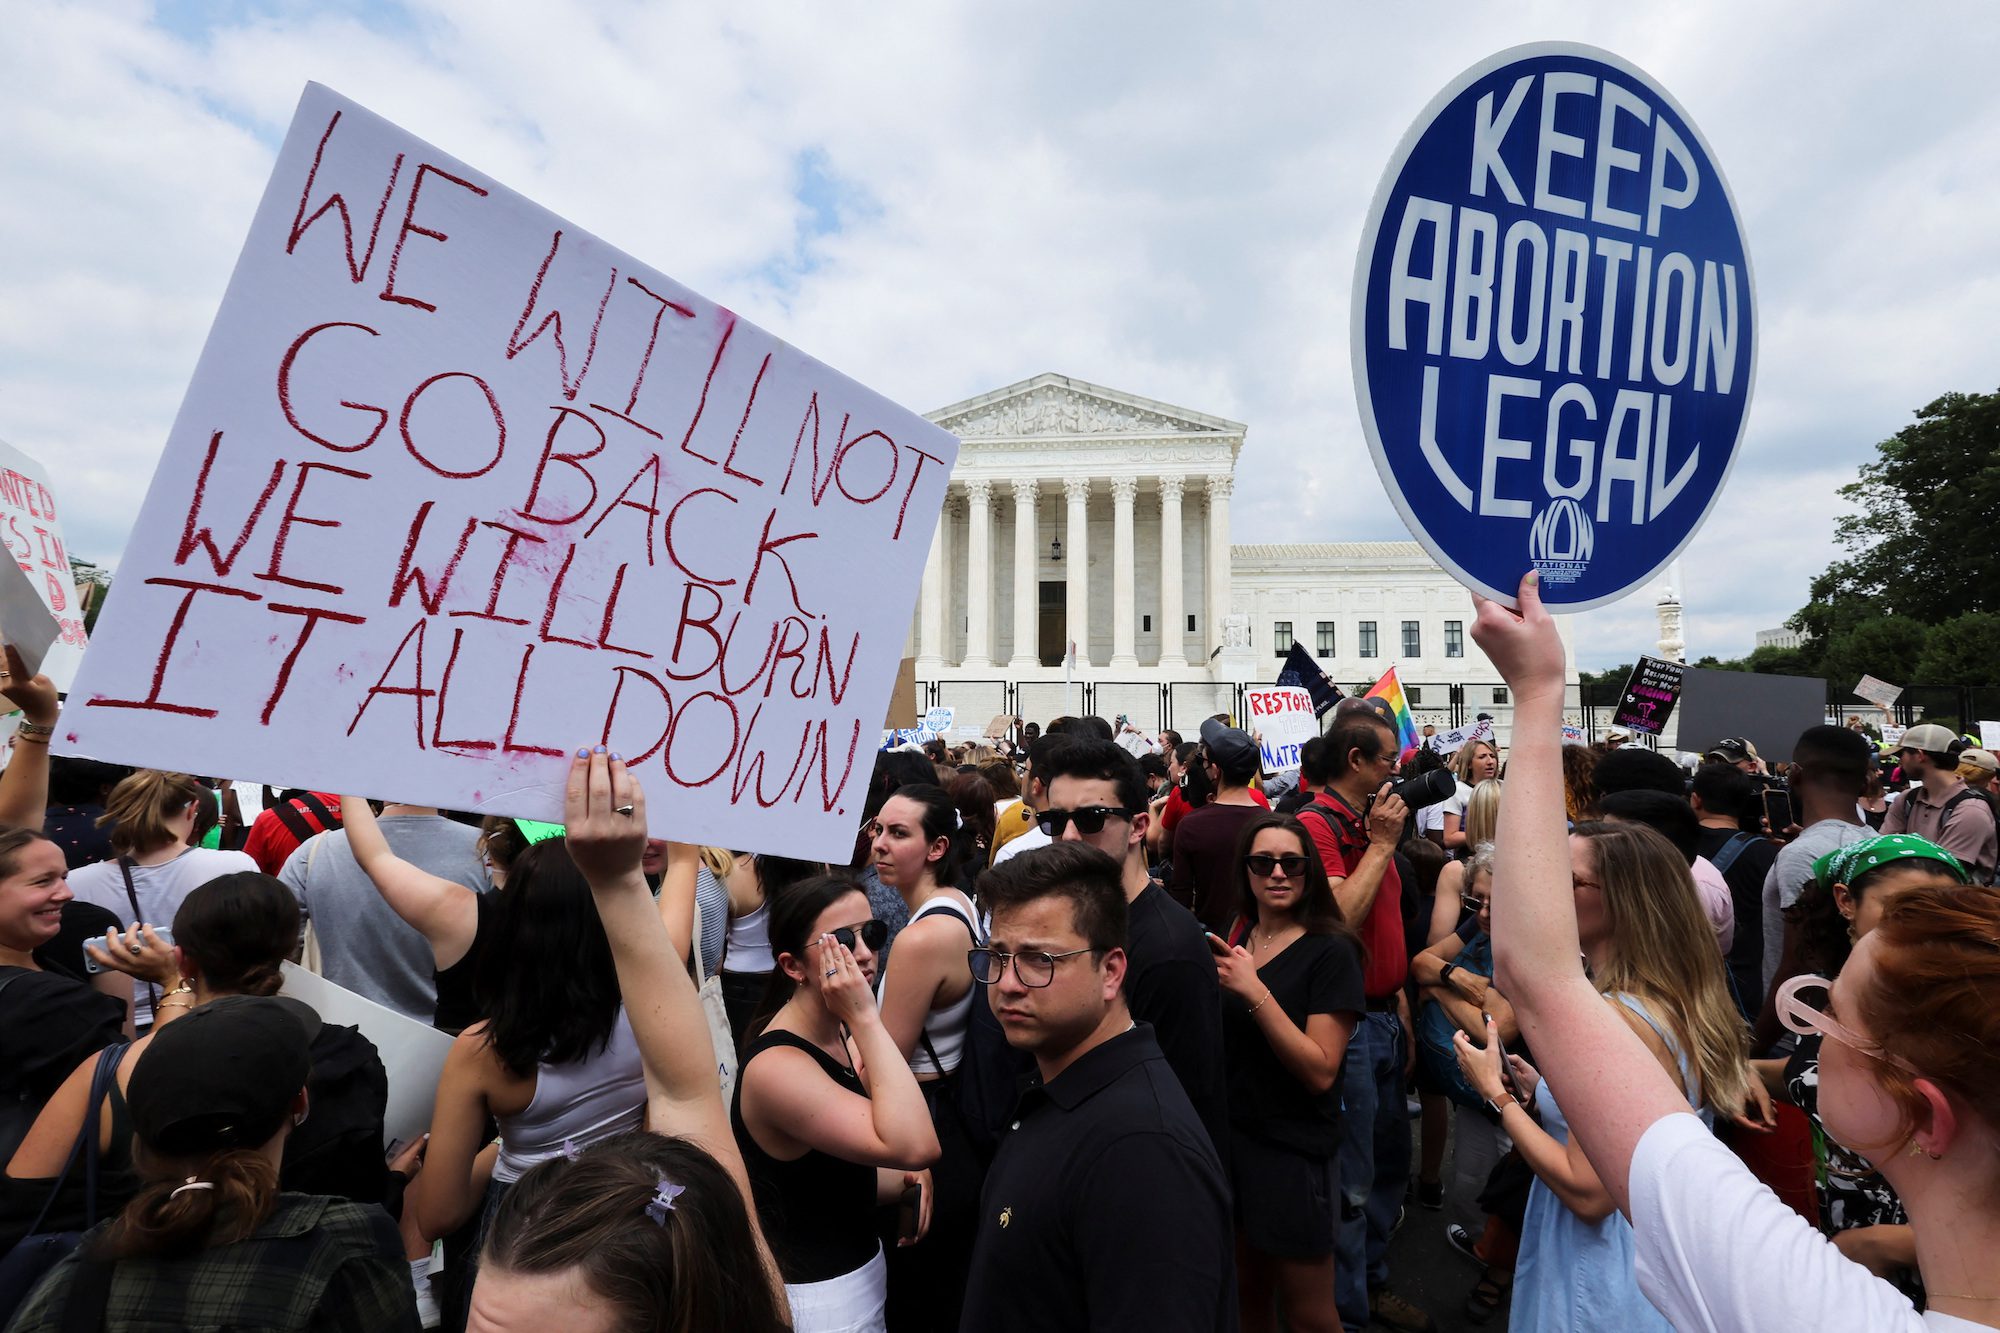 Abortion rights demonstrators protest outside the United States Supreme Court as the court rules in the Dobbs v Women's Health Organization abortion case, overturning the landmark Roe v Wade abortion decision in Washington, U.S., June 24, 2022. REUTERS/Jim Bourg